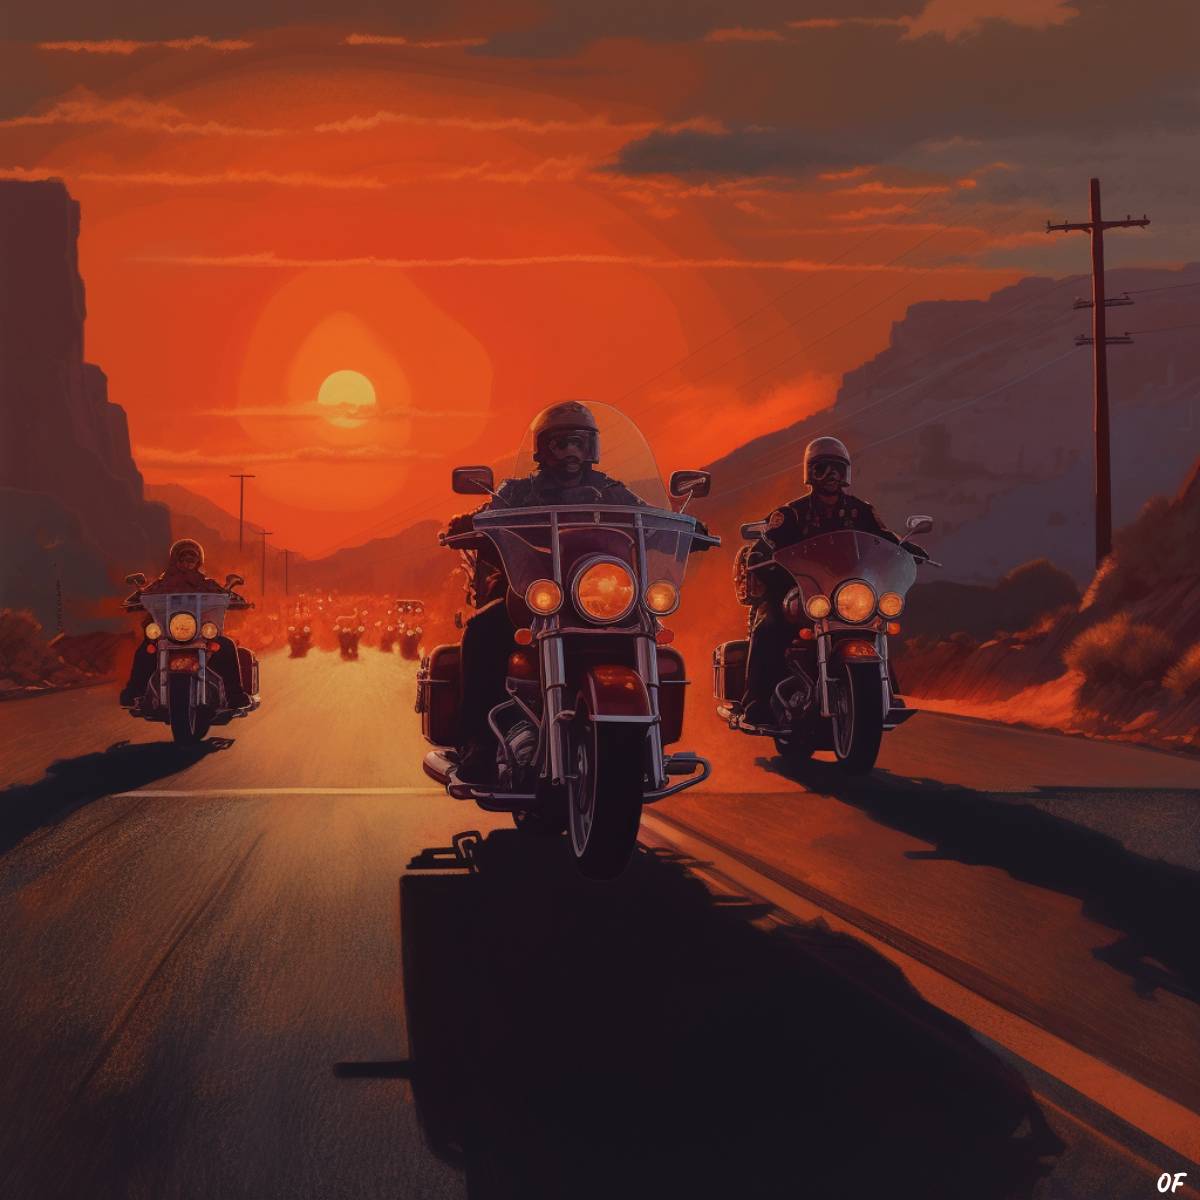 A Hells Angel Chapter riding in formation as the sun sets behind them.